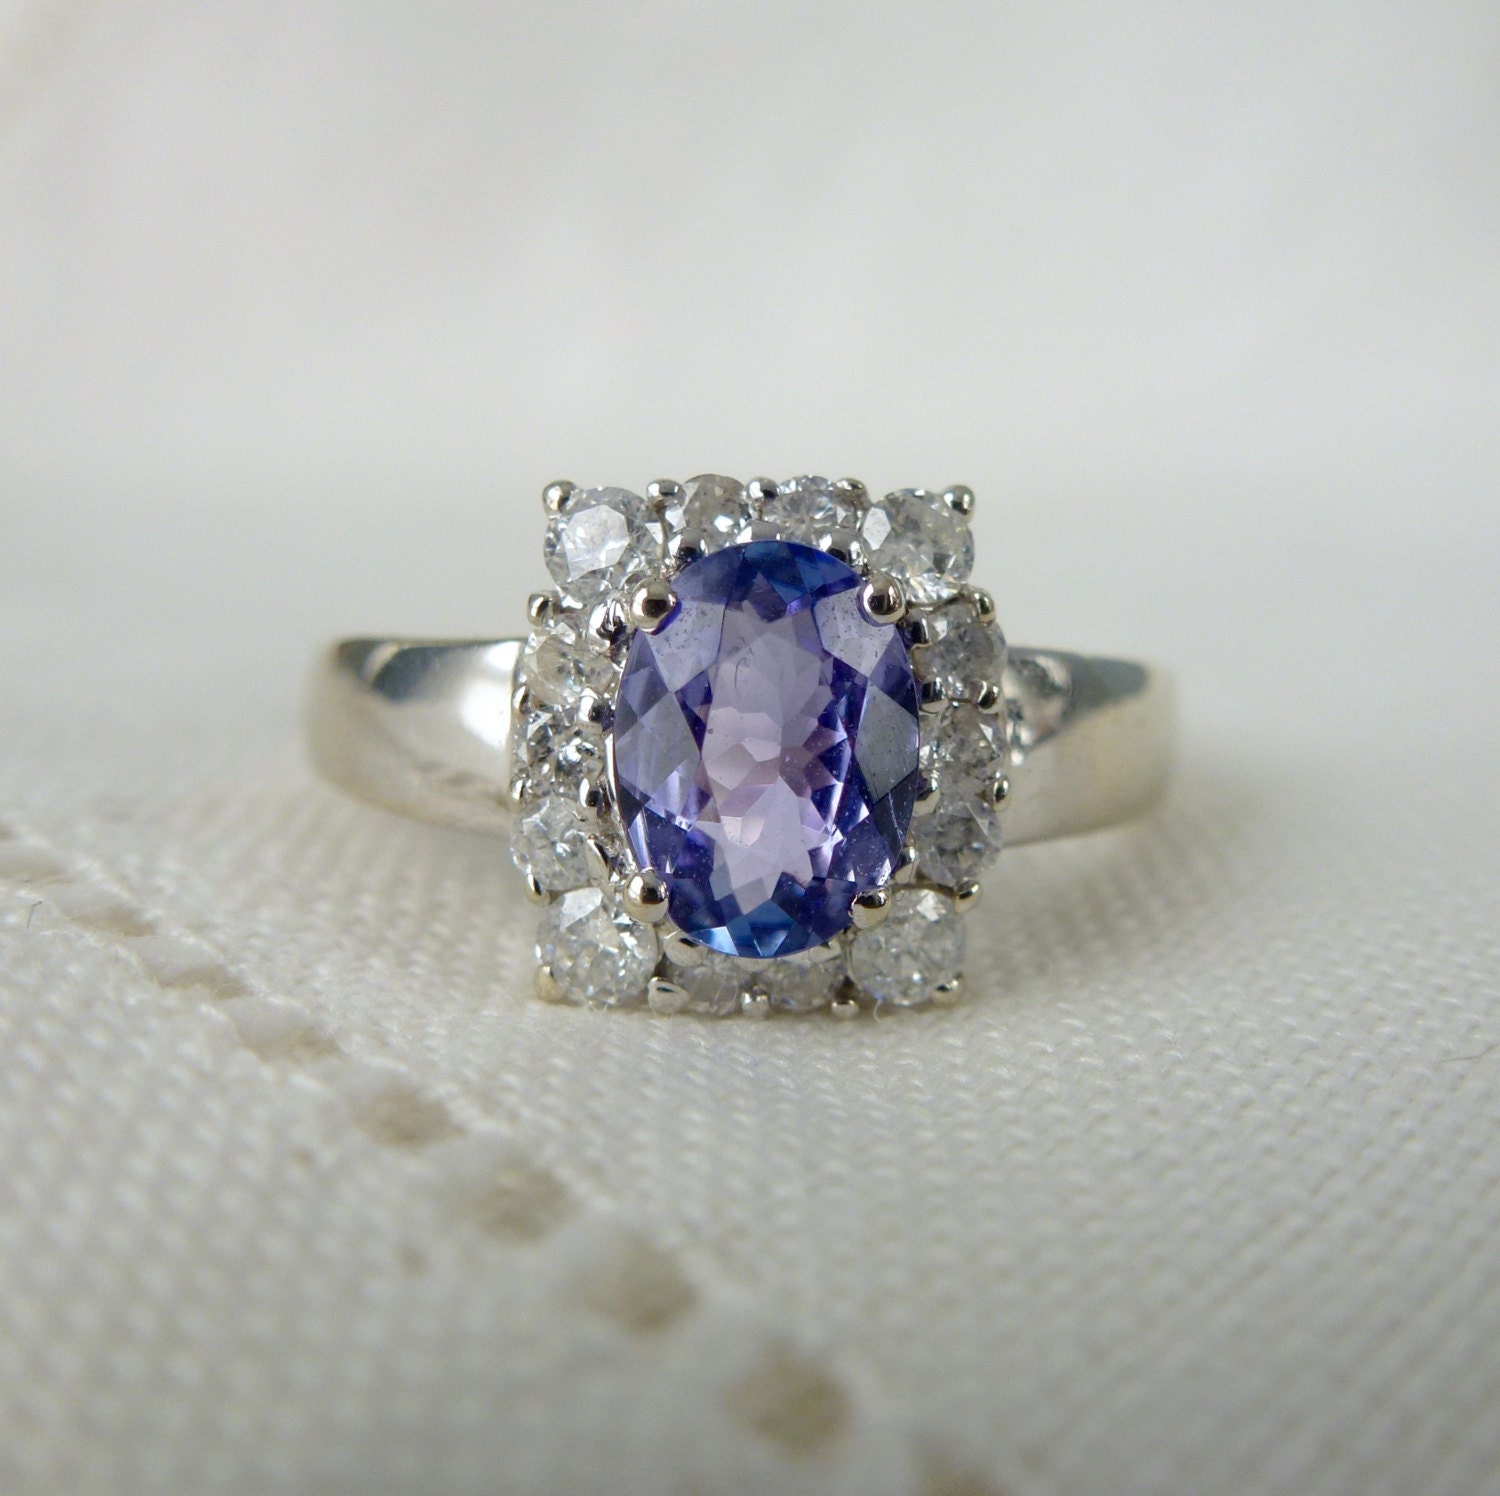 A Vintage Natural Tanzanite and Diamond 14kt White Gold Ring